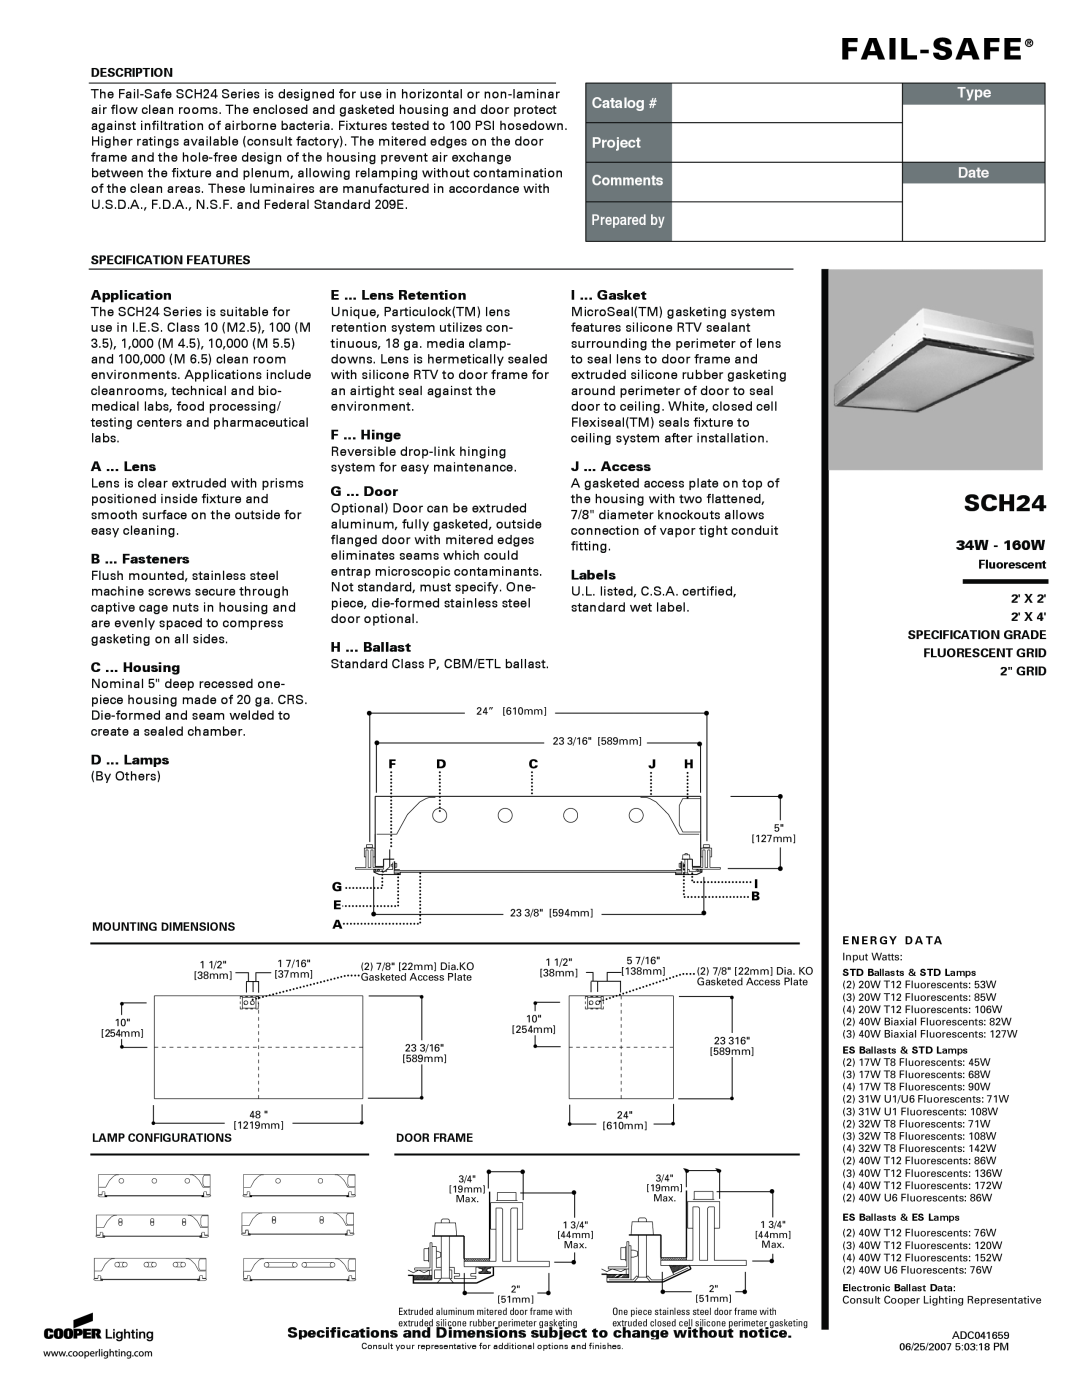 Cooper Lighting SCH24 specifications 34W - 160W, Specifications and Dimensions subject to change without notice, Fail-Safe 